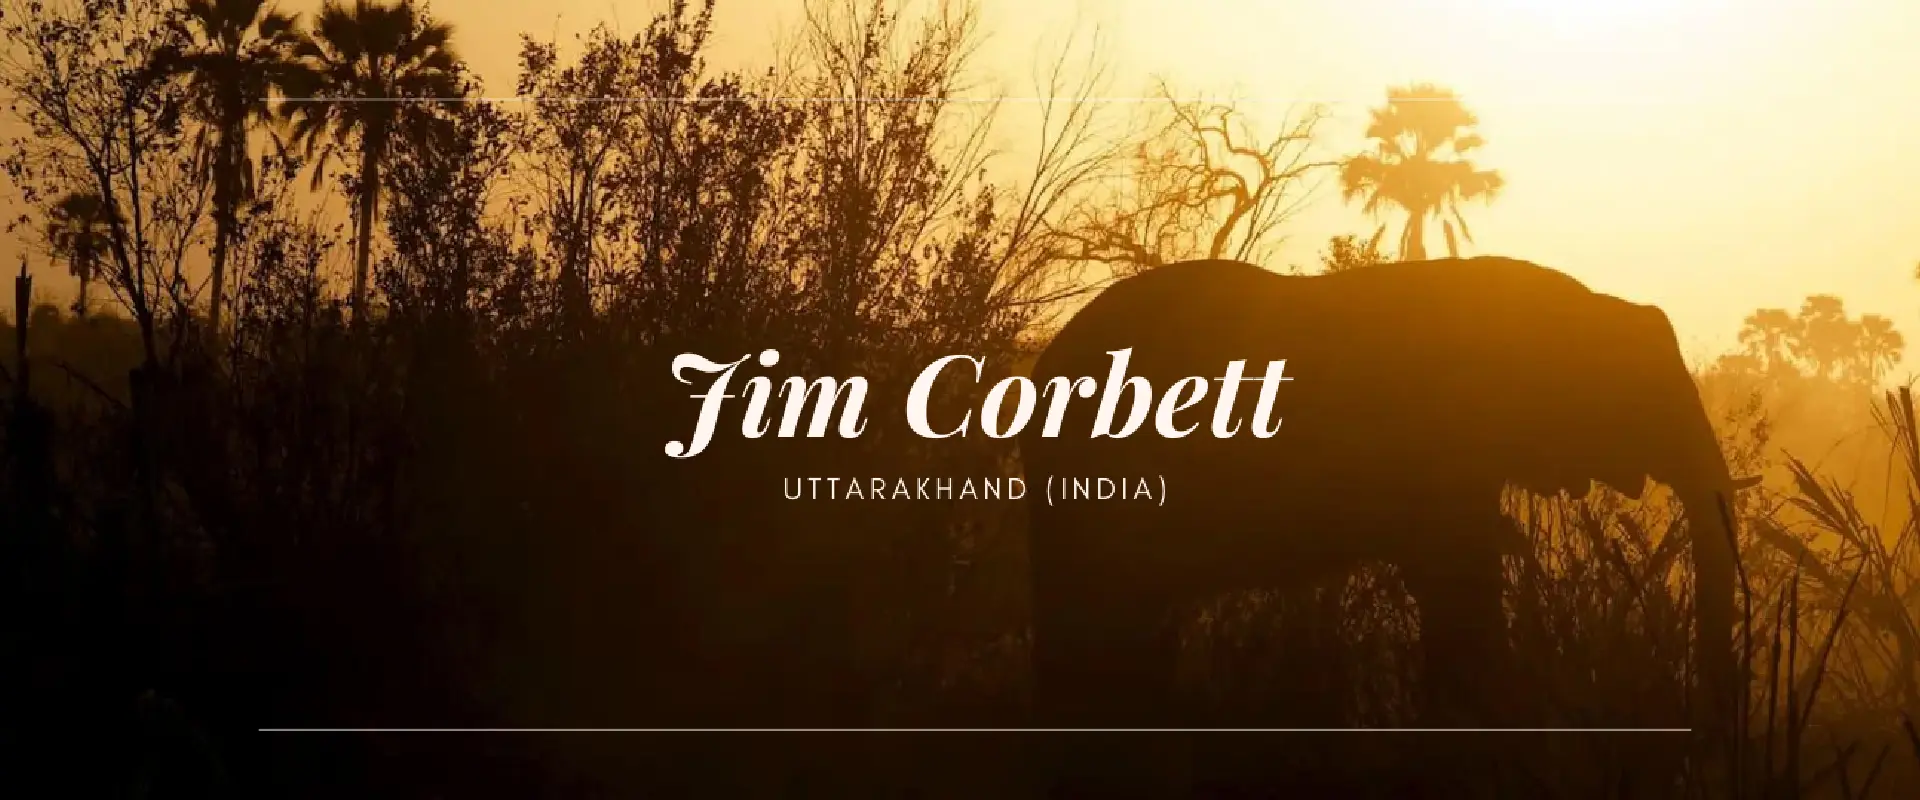 Jim Corbett cheapest tours packages for couple